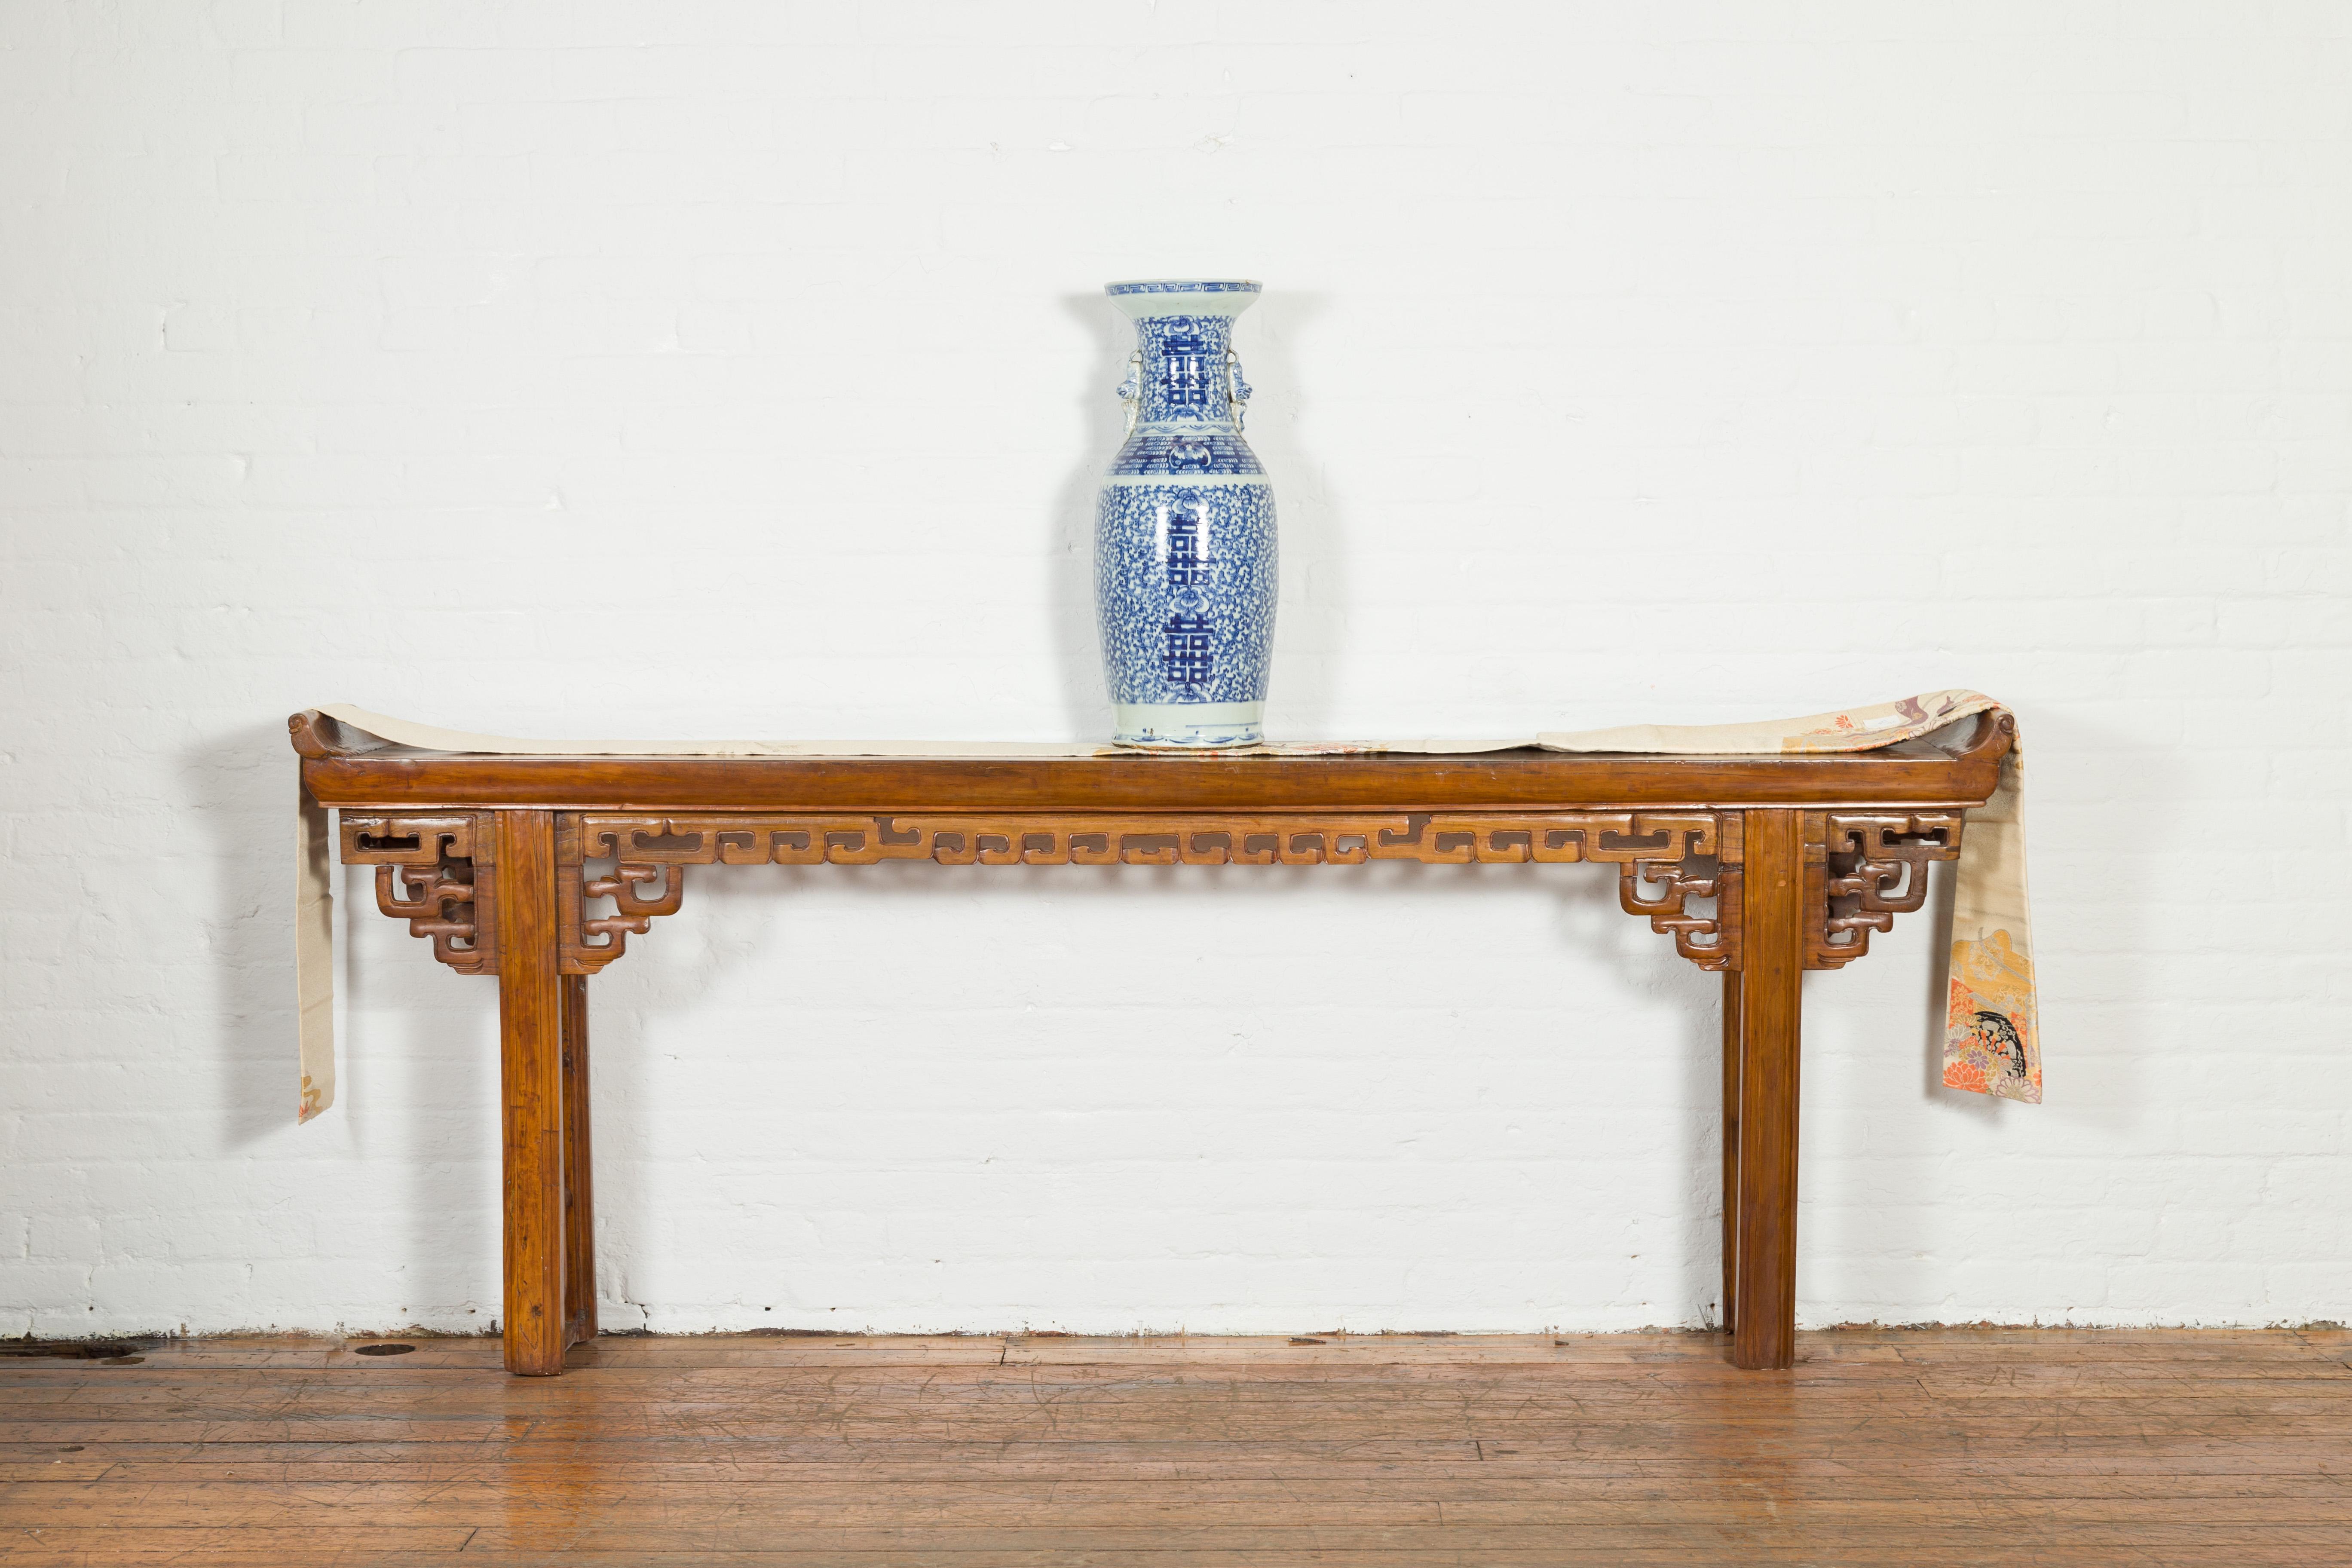 A Chinese Qing dynasty period altar console table from the 19th century, with everted flanges and open fretwork. Created in China during the 19th century, this Qing dynasty altar table features a narrow rectangular top with everted flanges, sitting